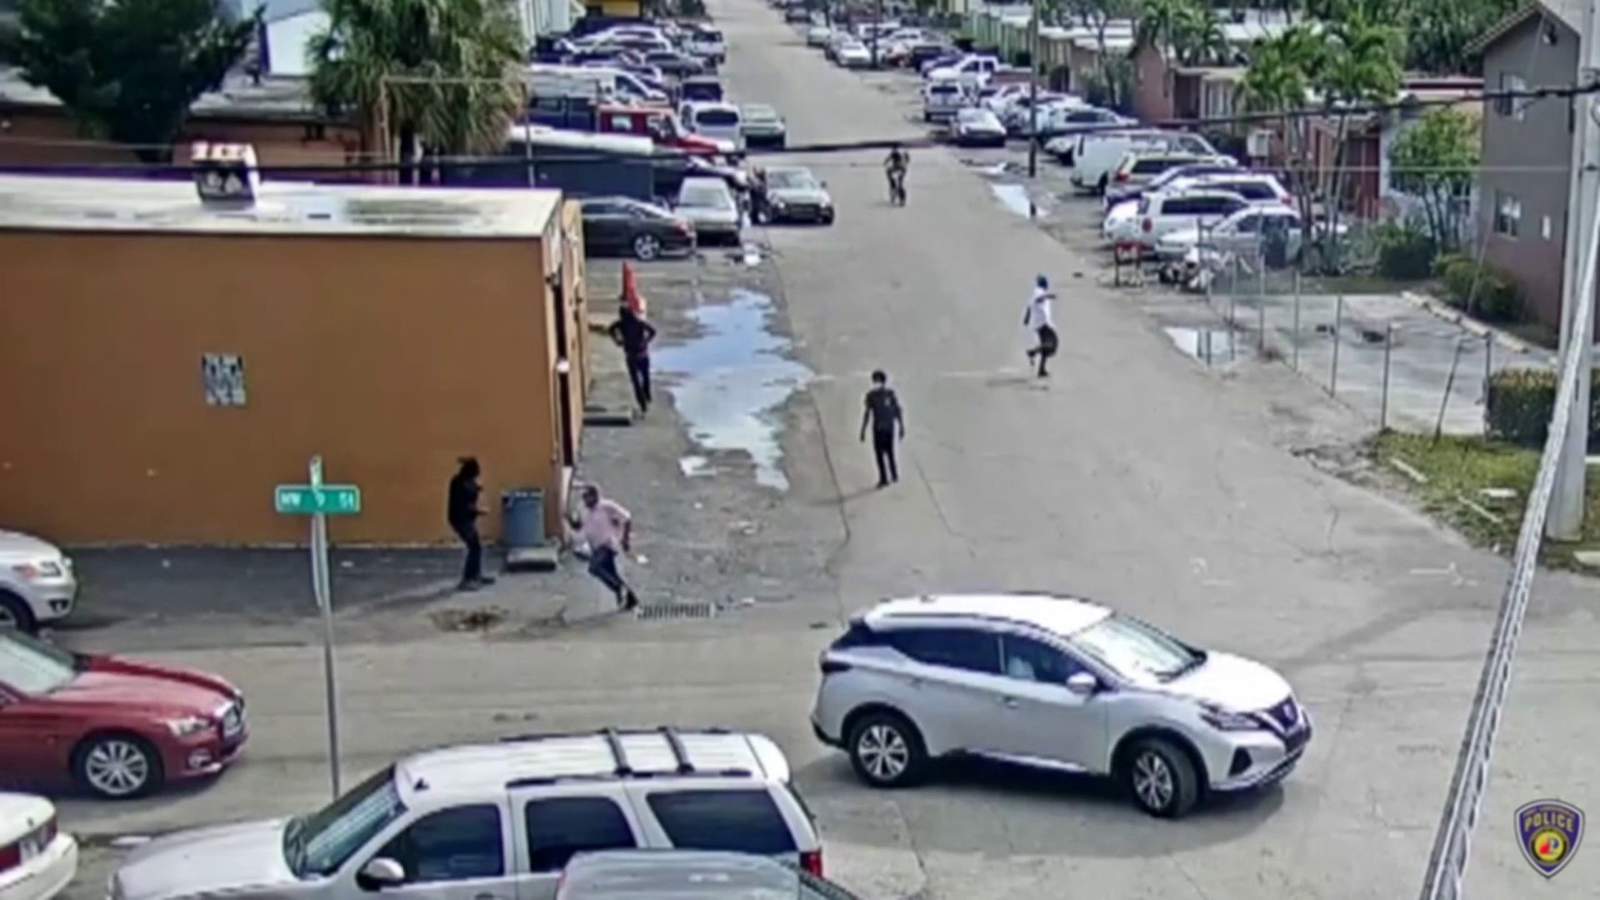 Surveillance video released of person sought in fatal Fort Lauderdale shooting